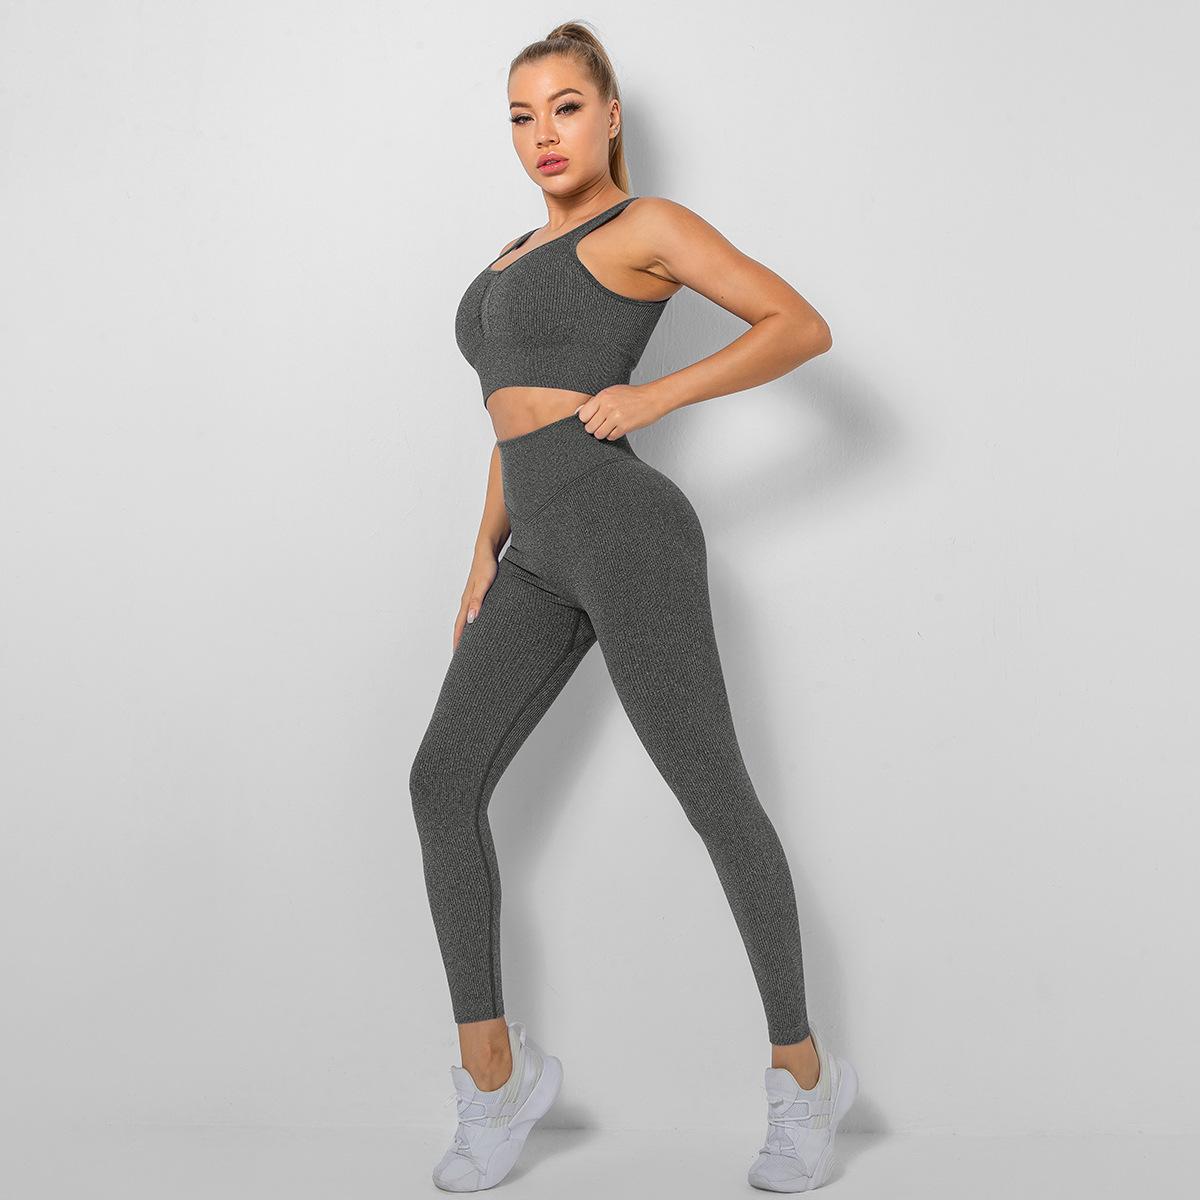 Seamless Knitted Workout Exercise Outfit - activewear - sports set - Sports Sets - malbusaat.co.uk